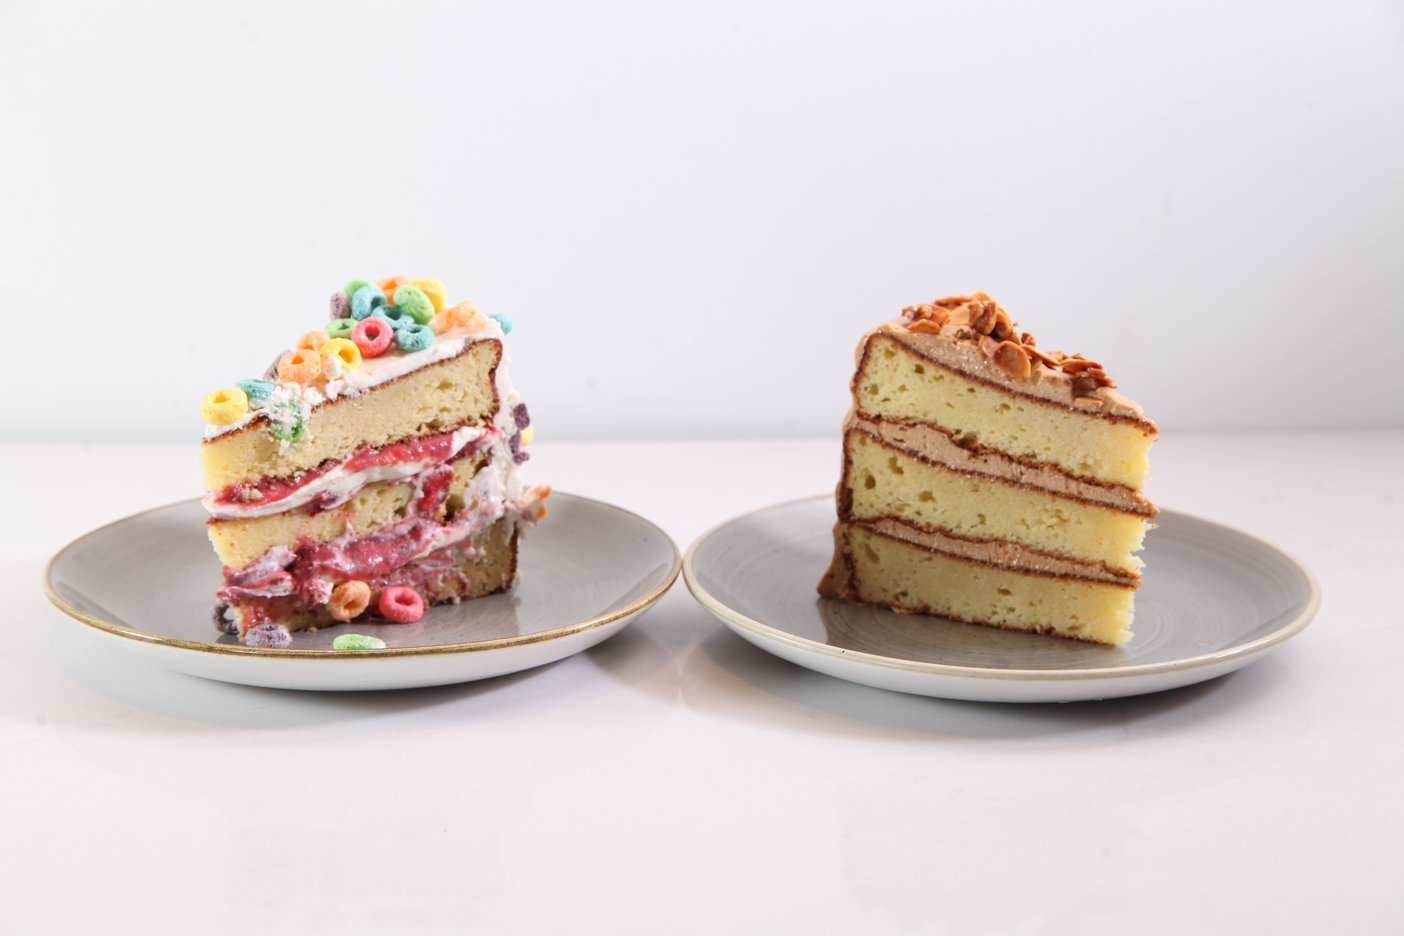 Some of the cake options now offered at Ebb & Flow, a grab-and-go dining concept from chef Francois Payard.